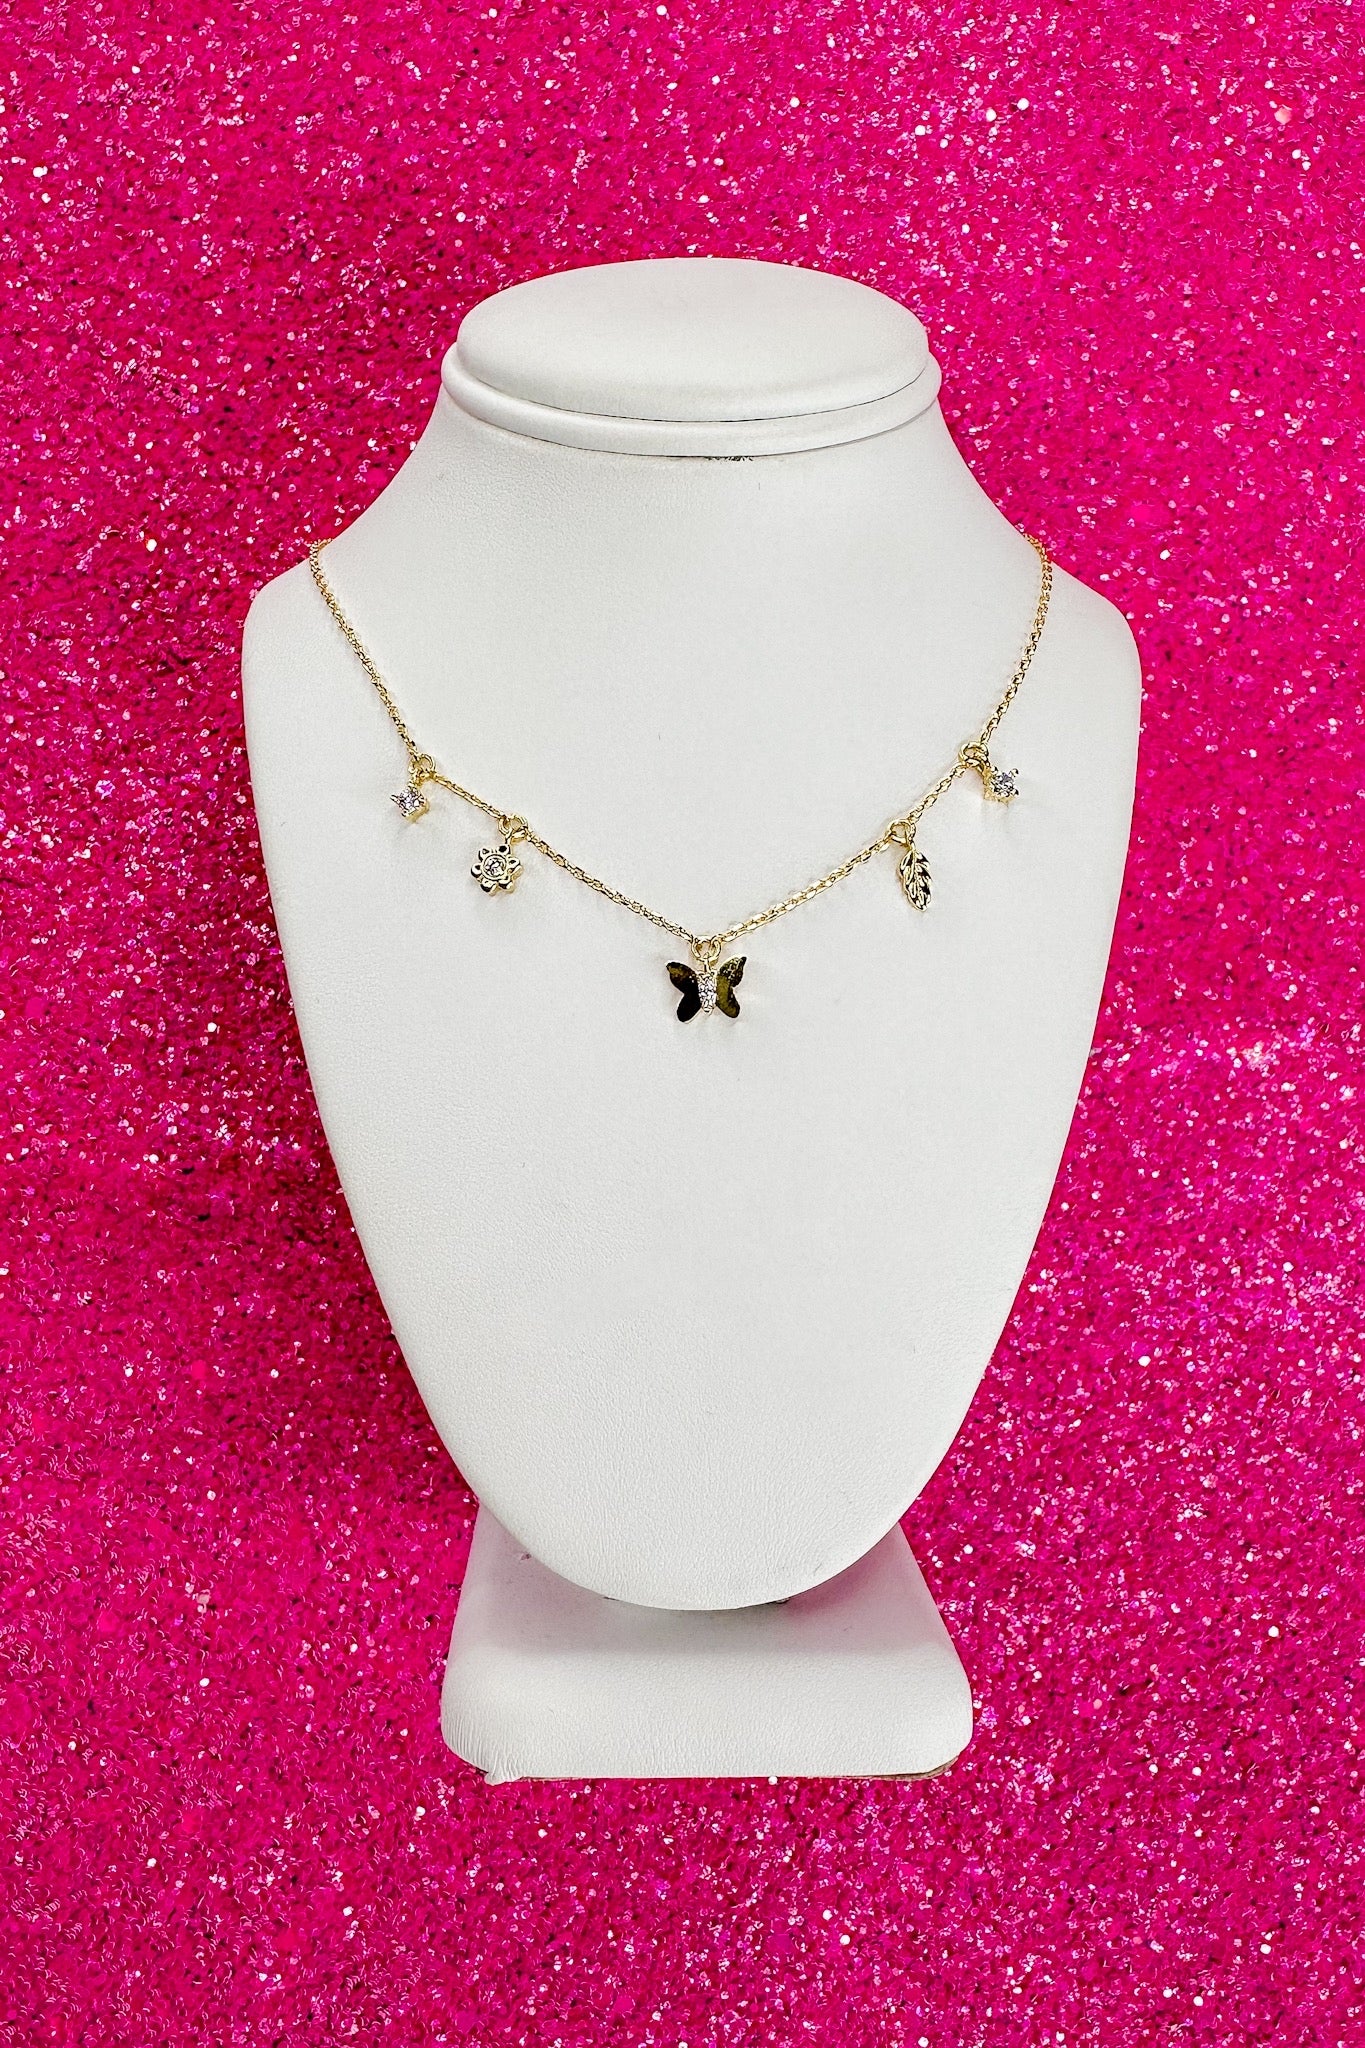 Butterfly Rhinestone Gold Charm Necklace